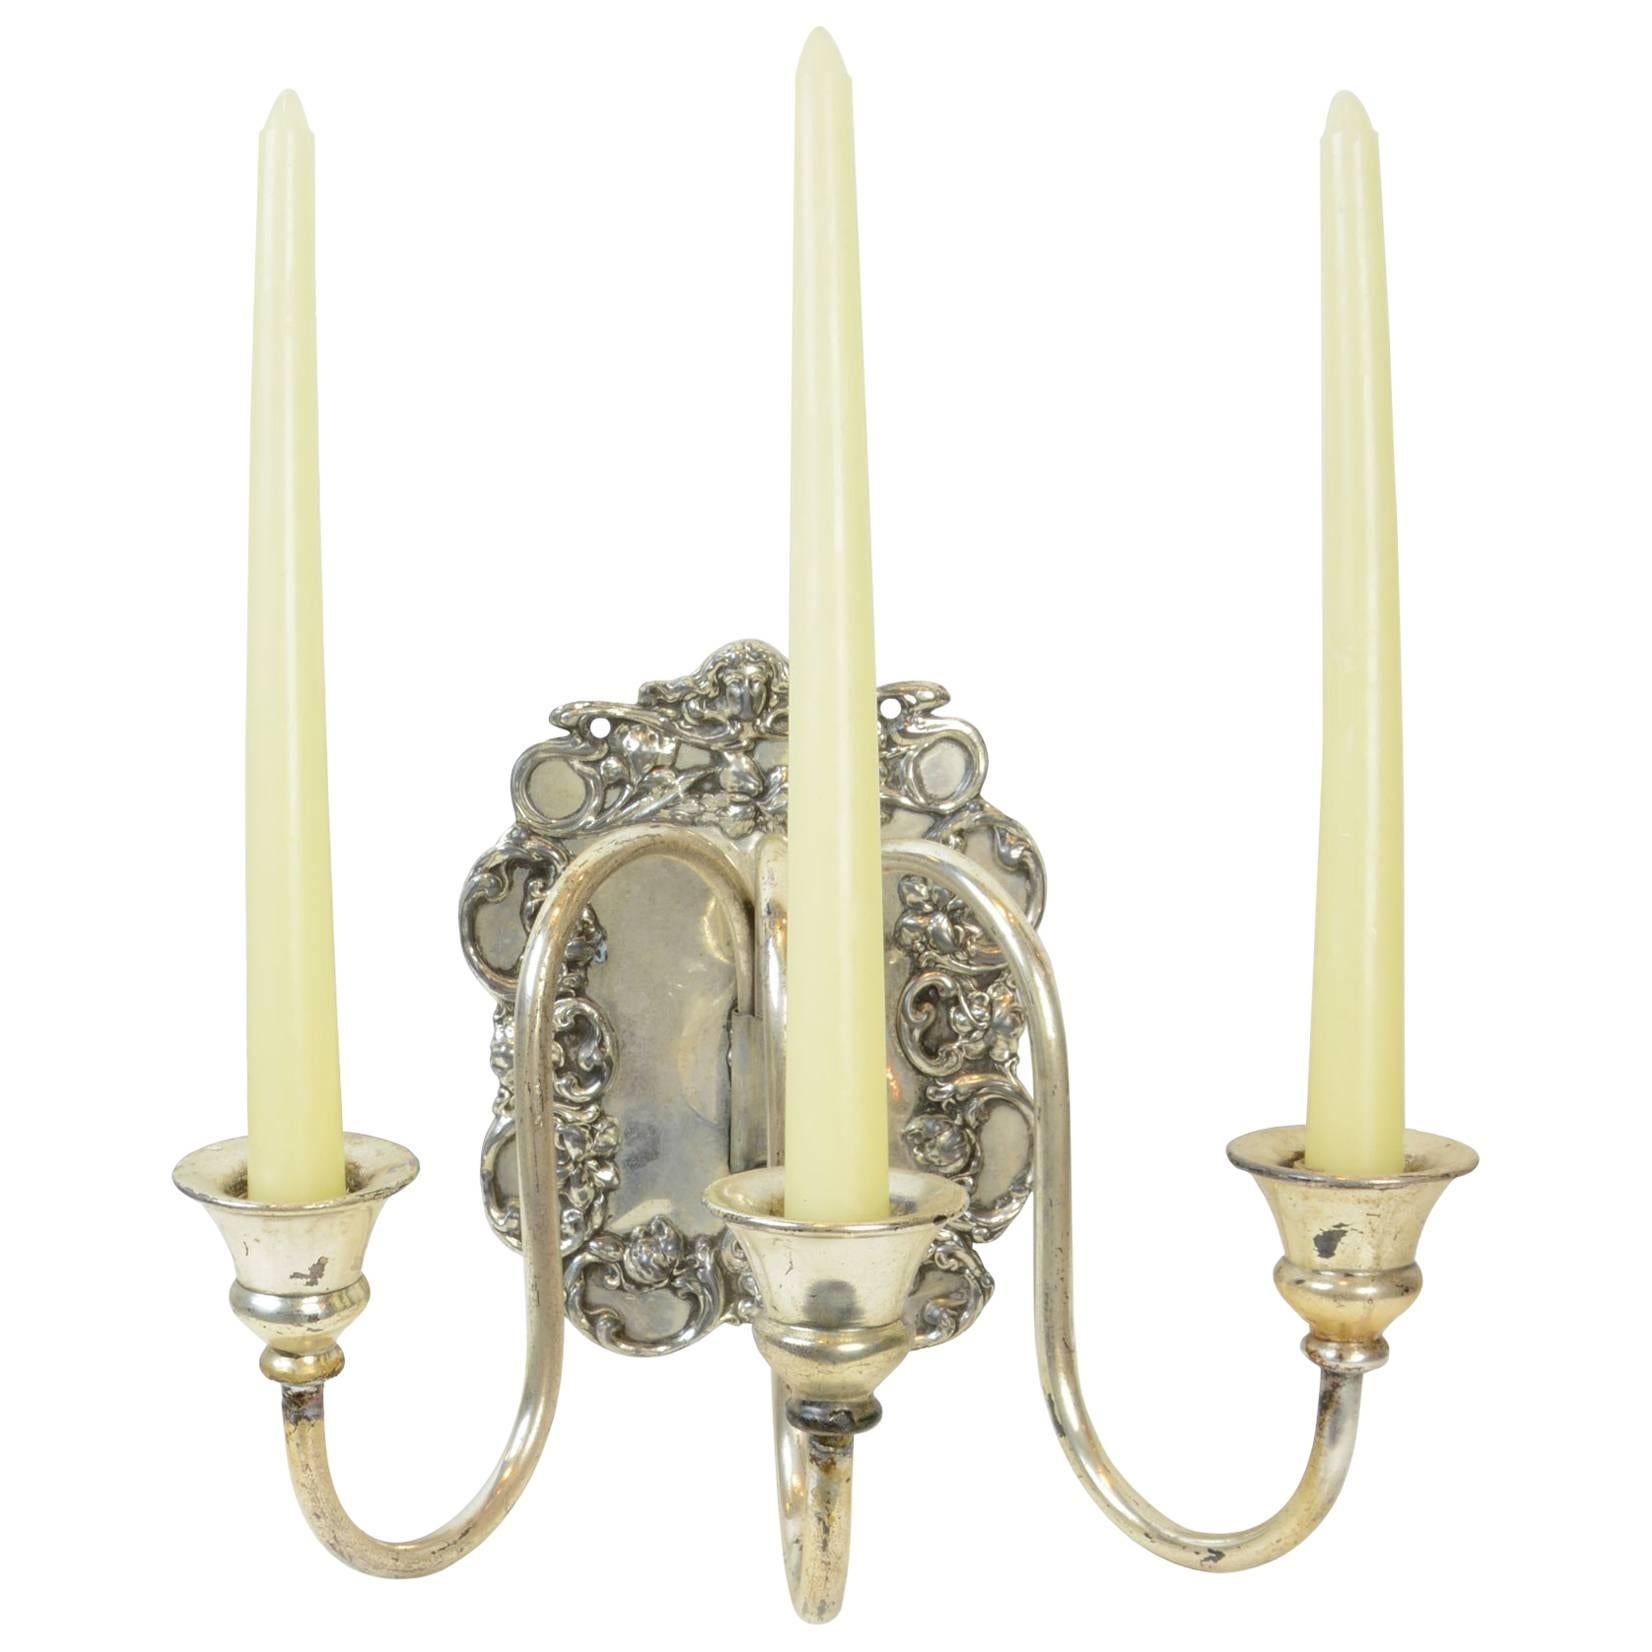 Fantastic Cast Copper and Silver Overlay Candle Sconces